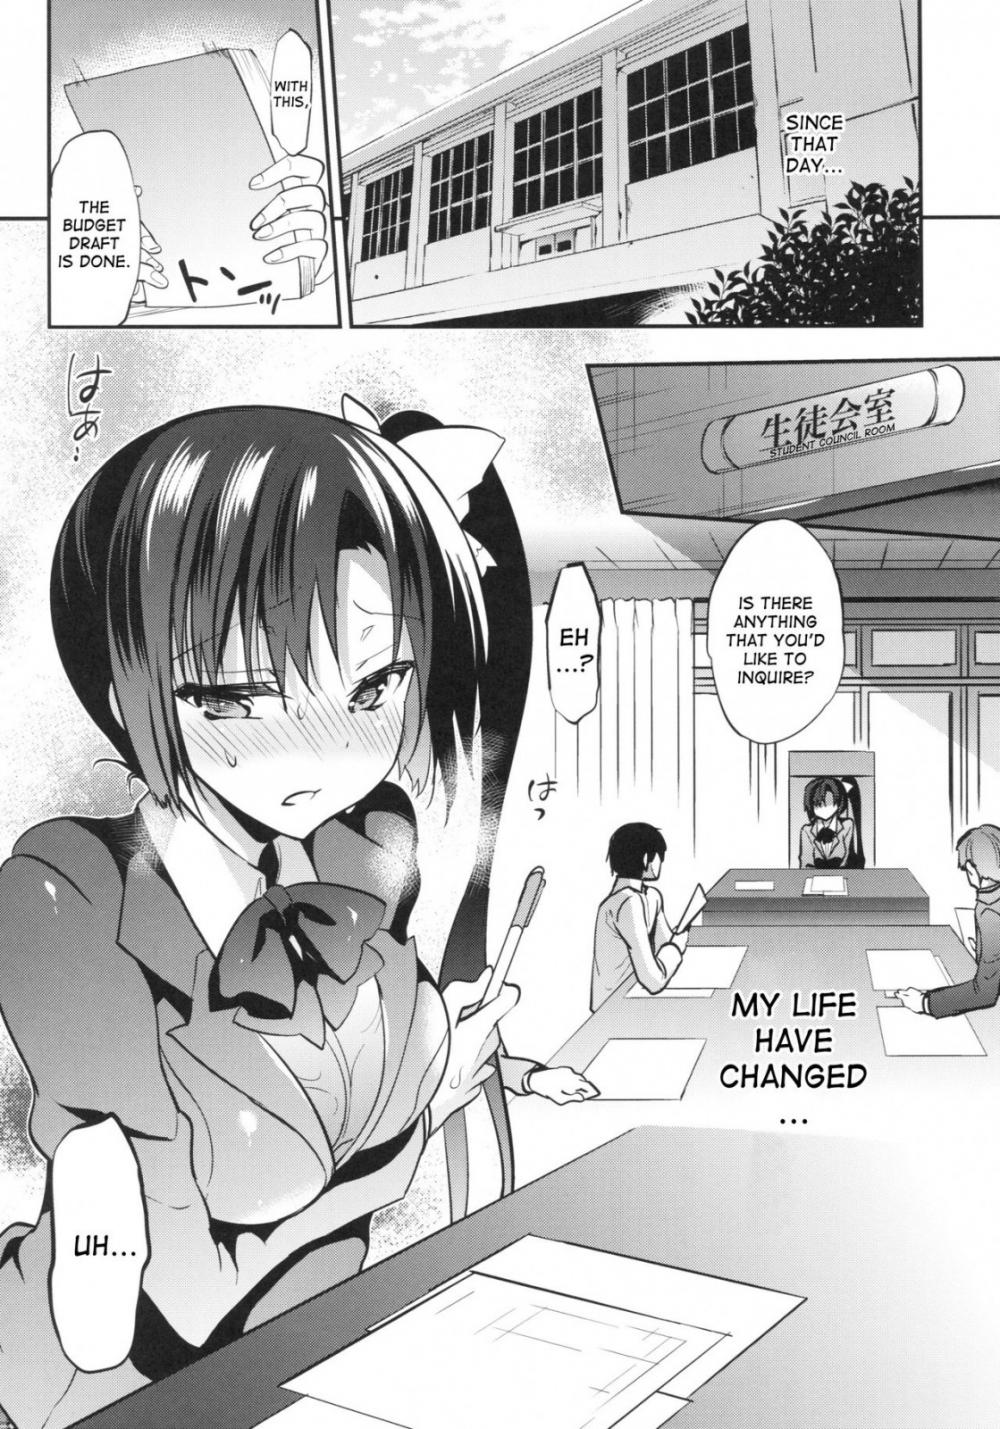 Hentai Manga Comic-School In The Spring of Youth 13-Read-4